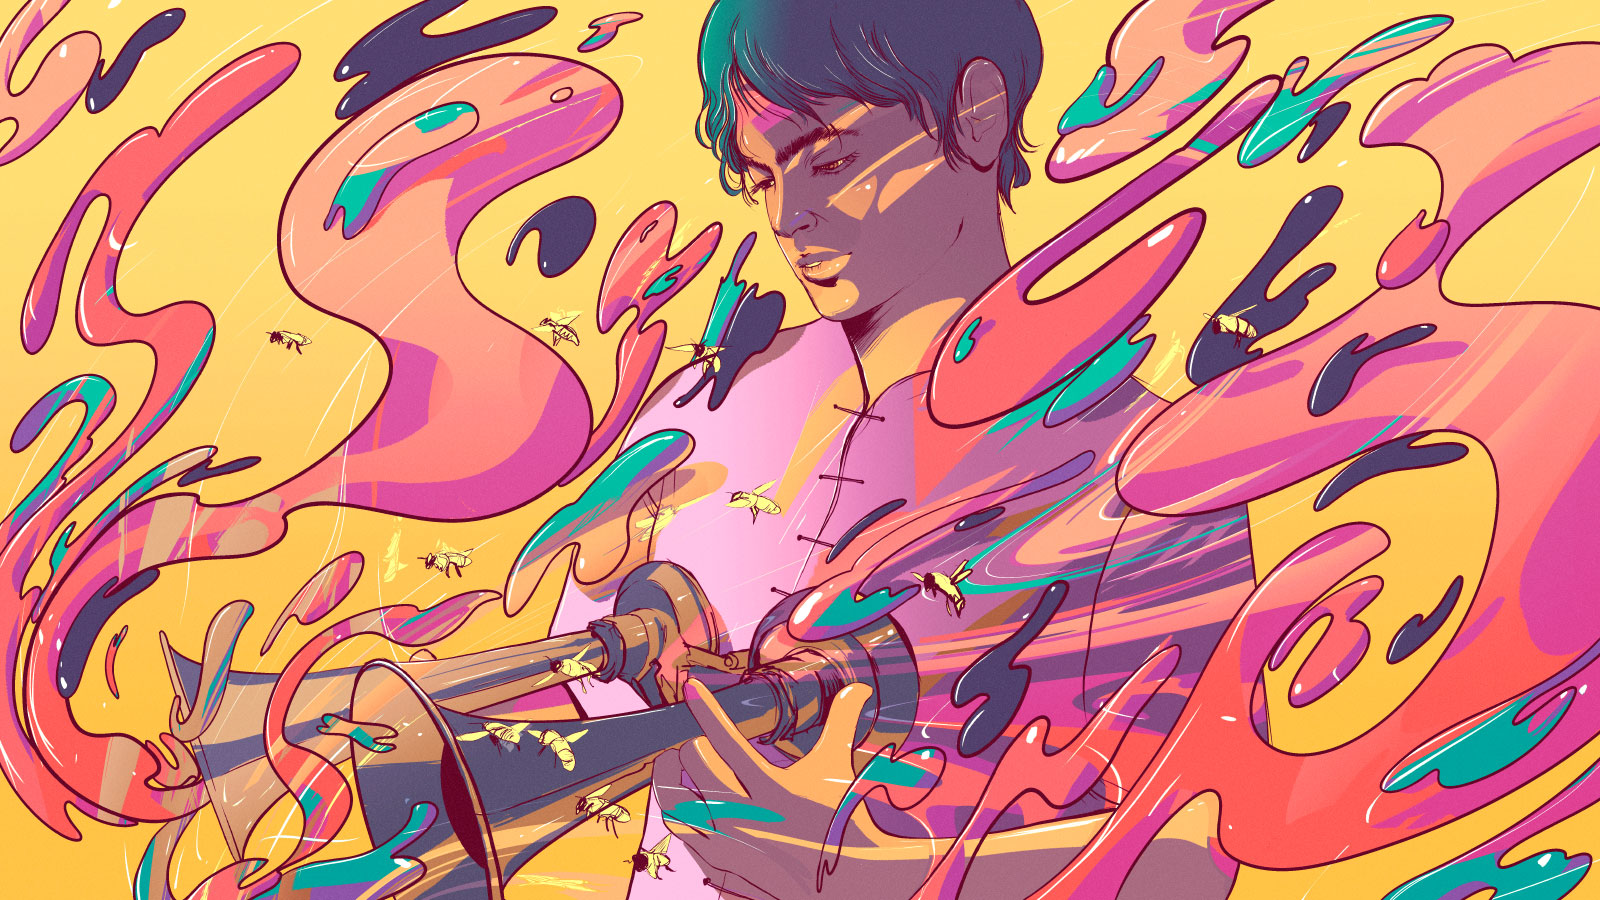 Illustration of a young South Asian man holding an antique brass horn that once was mounted on a ship. He stands against a vibrant backdrop of swirling colors.